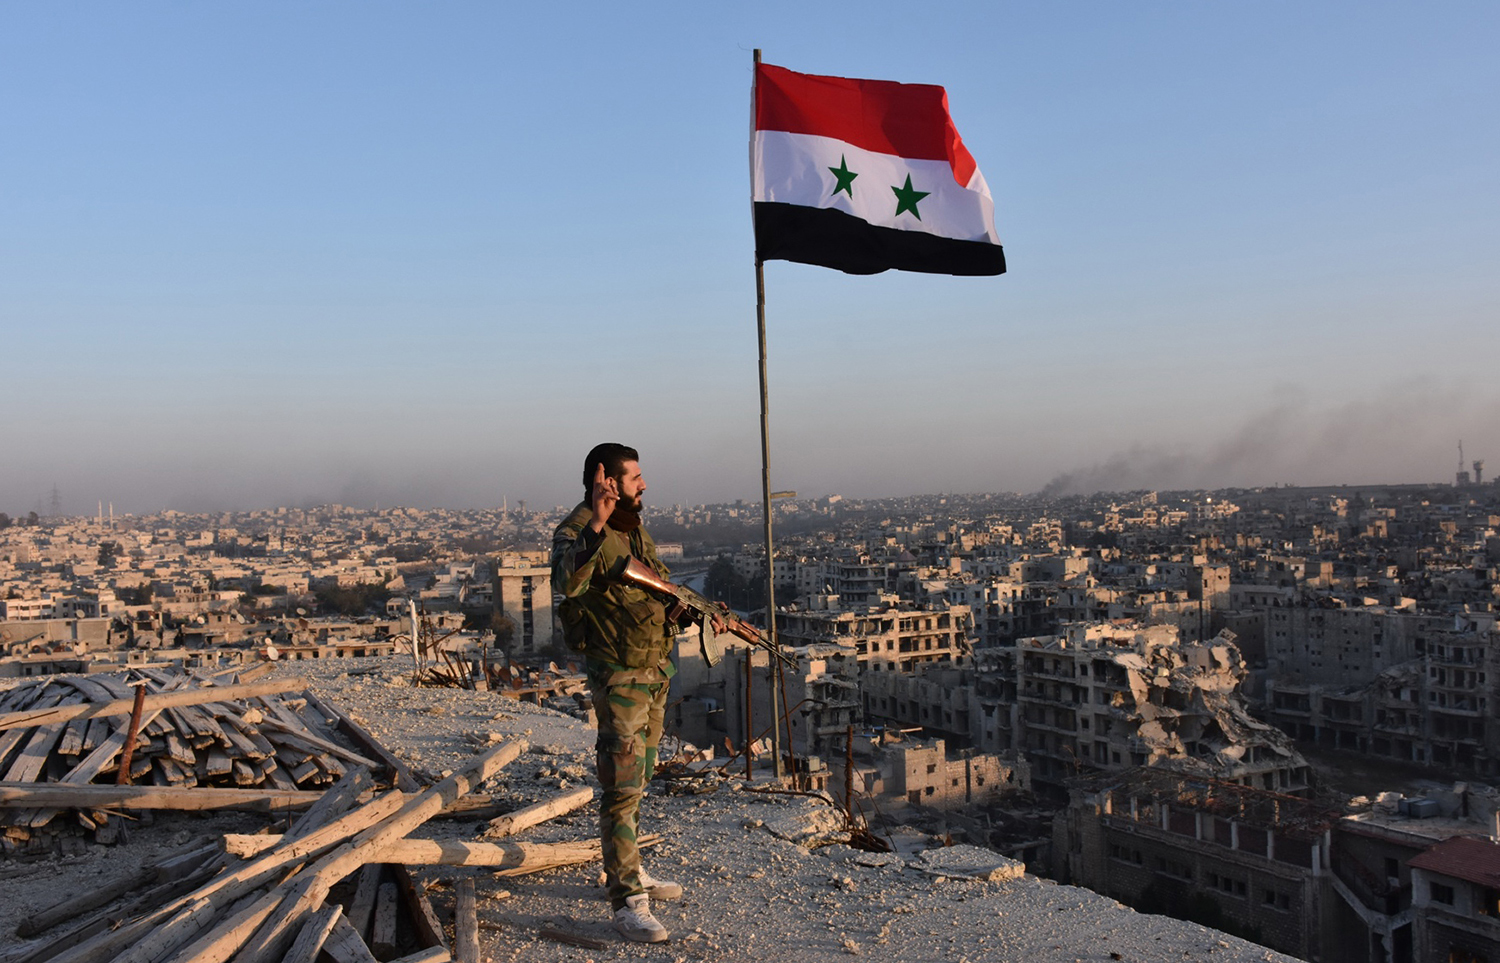 TOPSHOT - Syrian pro-government forces stand on top of a building overlooking Aleppo in the city's Bustan al-Basha neighbourhood on November 28, 2016, during their assault to retake the entire northern city from rebel fighters. In a major breakthrough in the push to retake the whole city, regime forces captured six rebel-held districts of eastern Aleppo over the weekend, including Masaken Hanano, the biggest of those in eastern Aleppo. / AFP PHOTO / GEORGE OURFALIAN / TT / kod 444